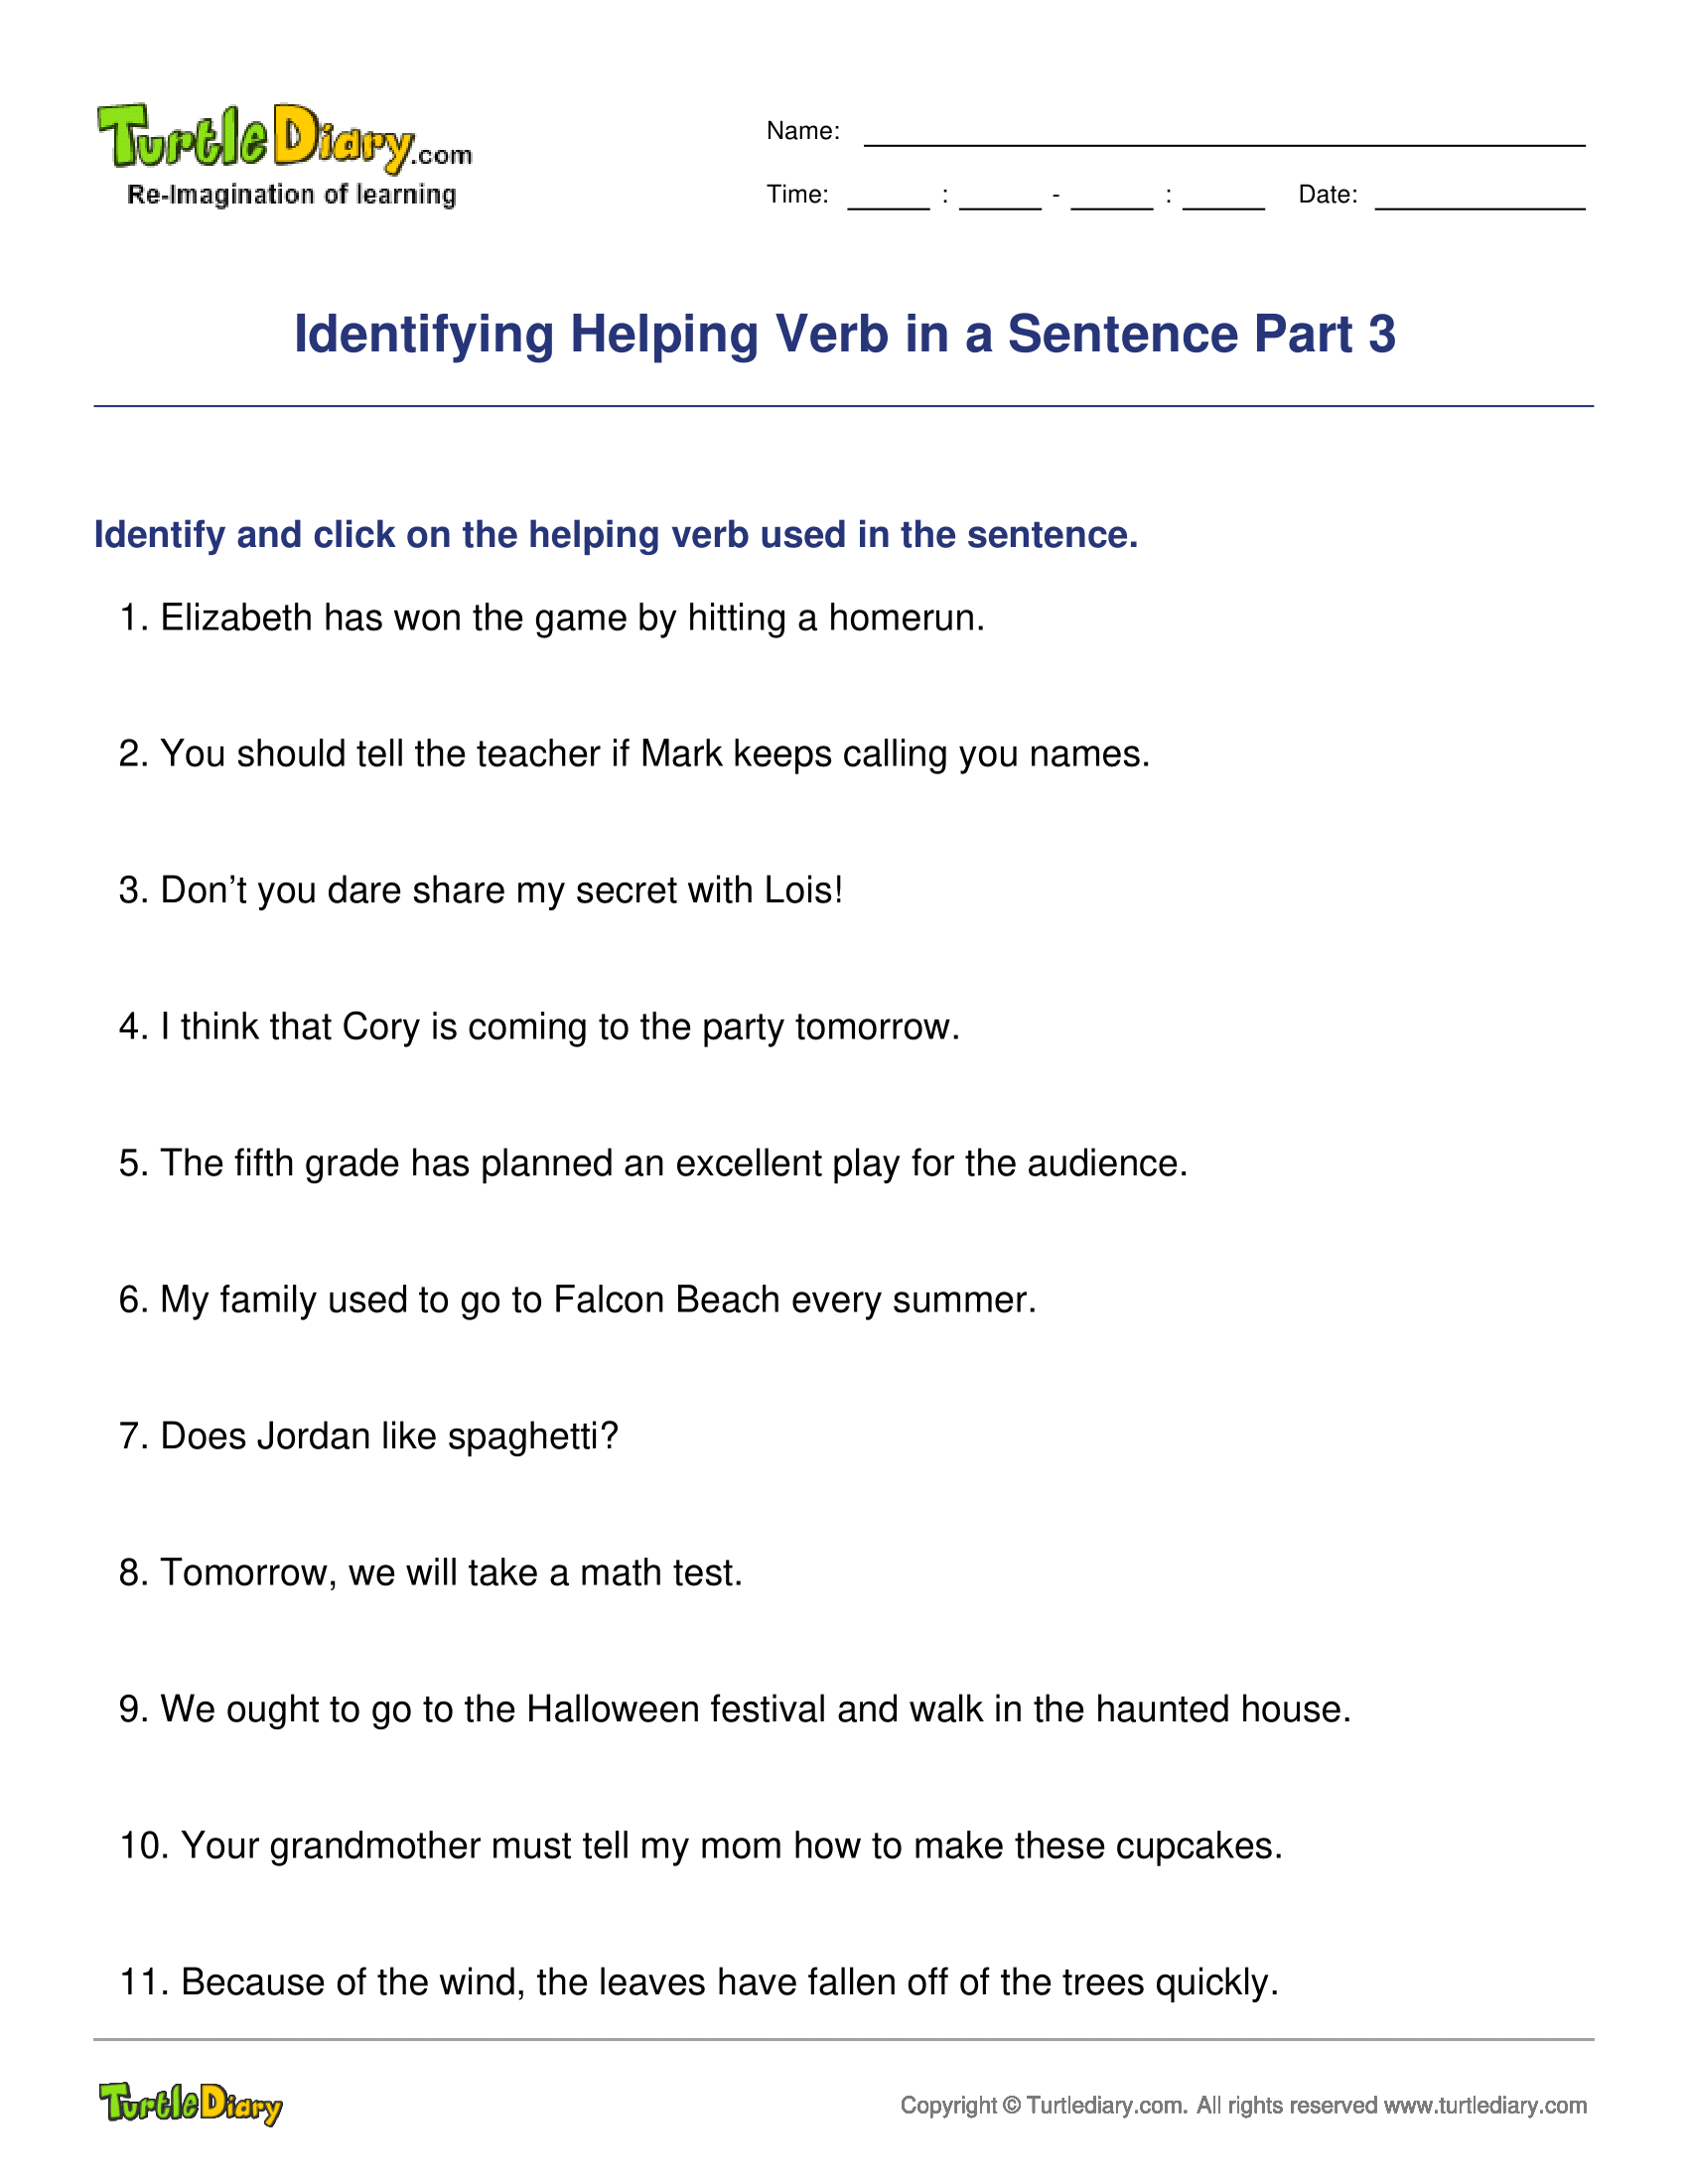 Identifying Helping Verb in a Sentence Part 3